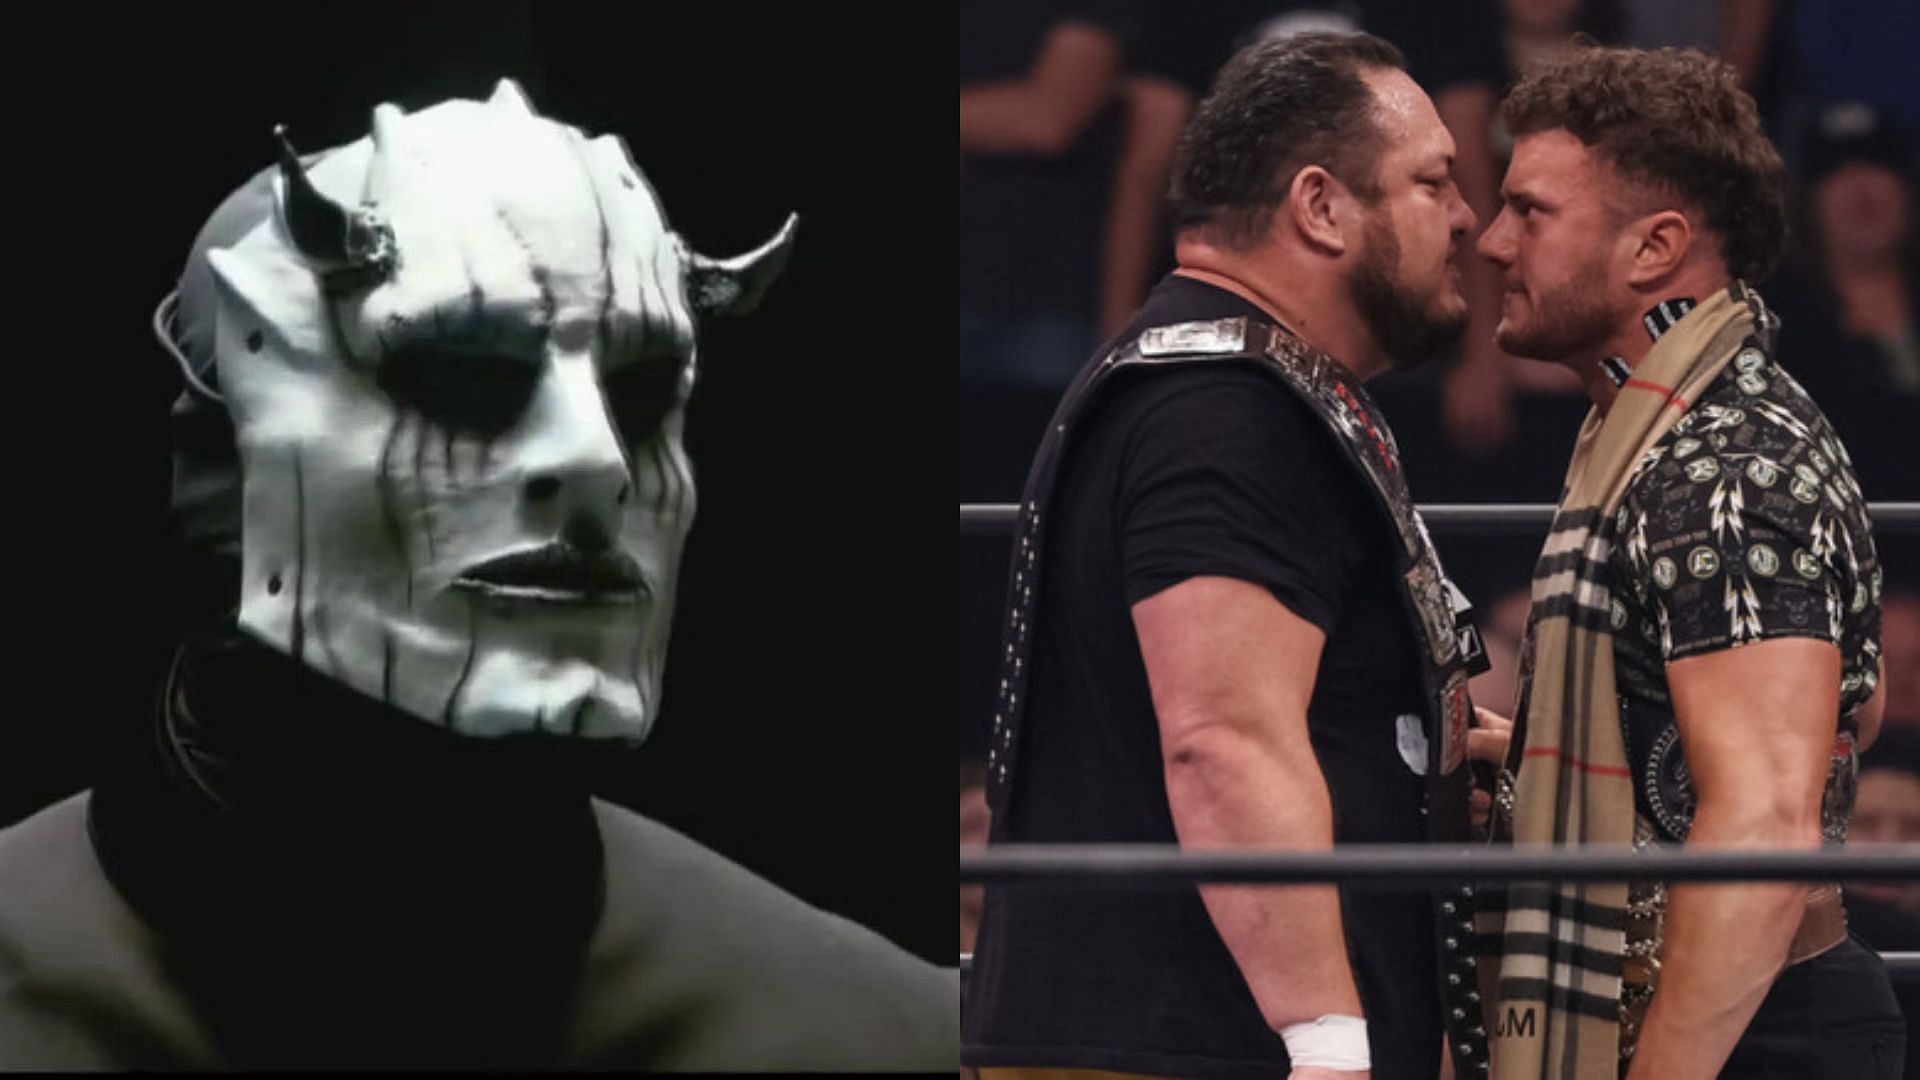 Who is behind the devil mask in AEW?